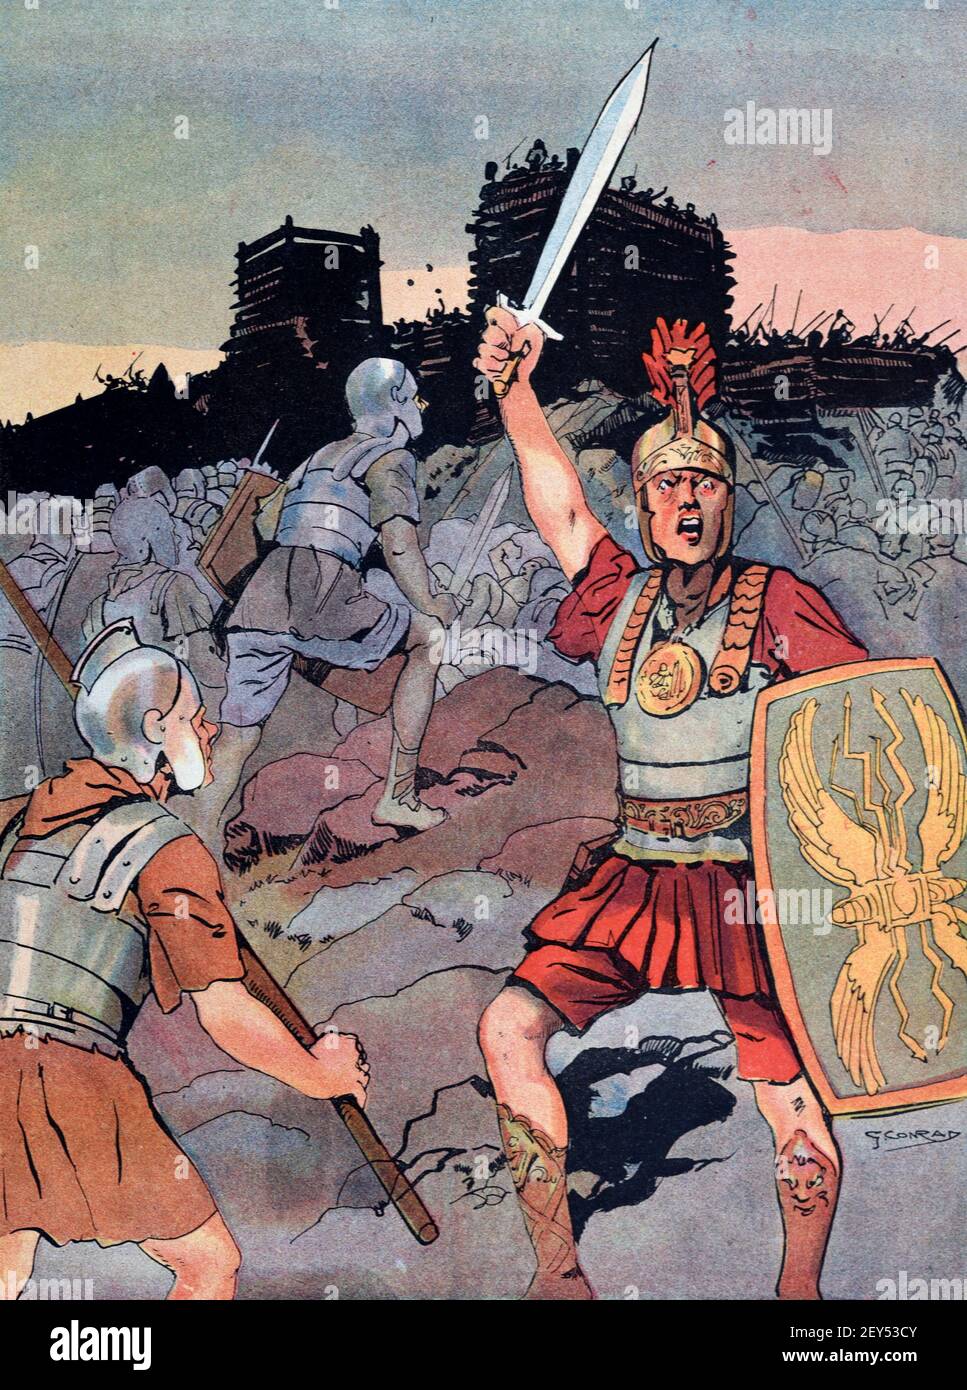 Victorious Roman Soldiers during the Siege of Alesia or Battle of Alesia (52BC) when the Romans, under Julius Ceasor, defeated the Gallic Tribes  Led by Vercingetrox in the Decisive Battle of the Gallic Wars (58BC-52BC). Ancient Gaul France. Vintage Illustration c1940 Stock Photo